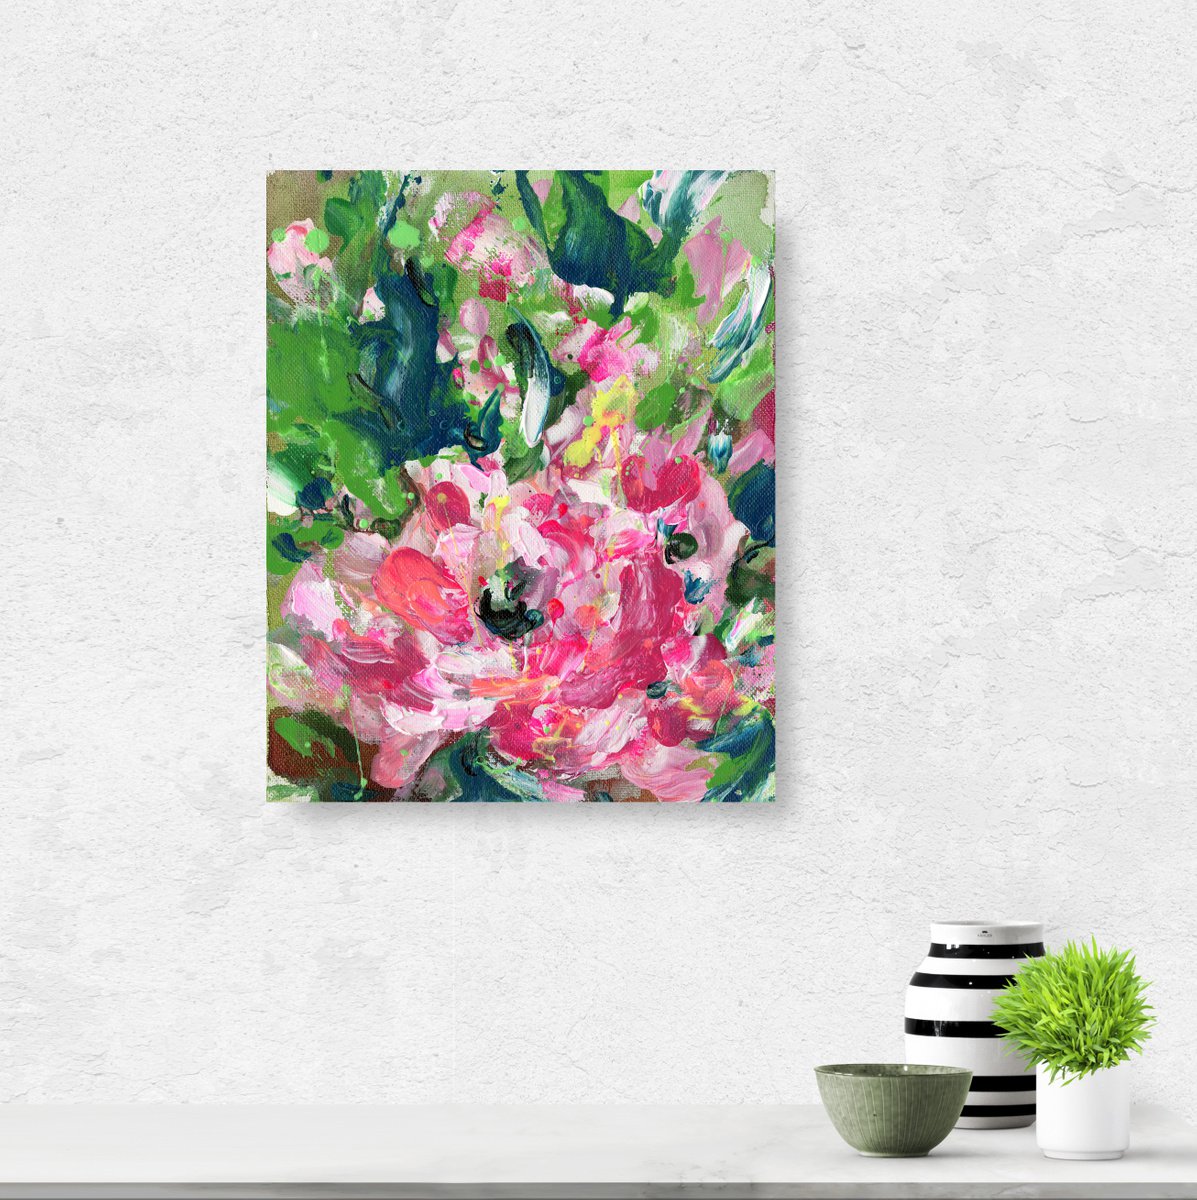 Floral Delight 4 - Floral Painting by Kathy Morton Stanion by Kathy Morton Stanion